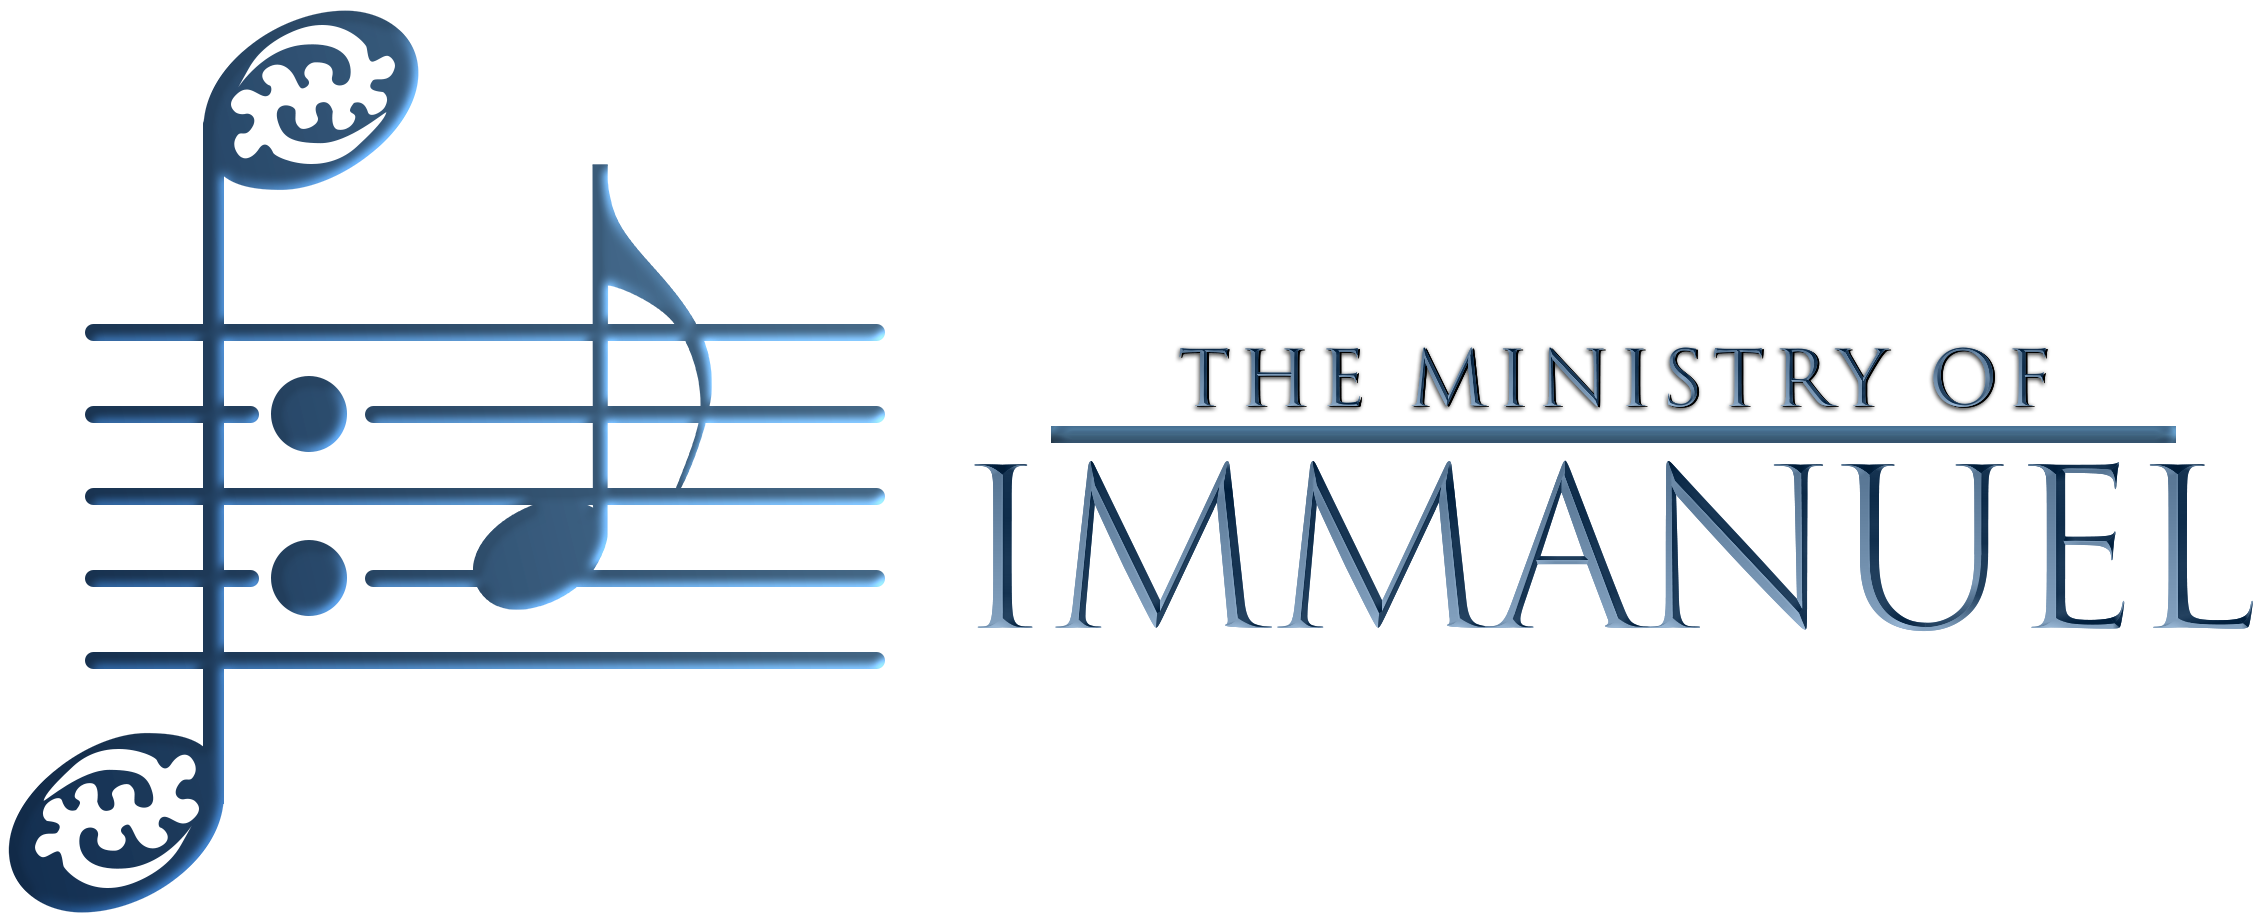 The Ministry of Immanuel